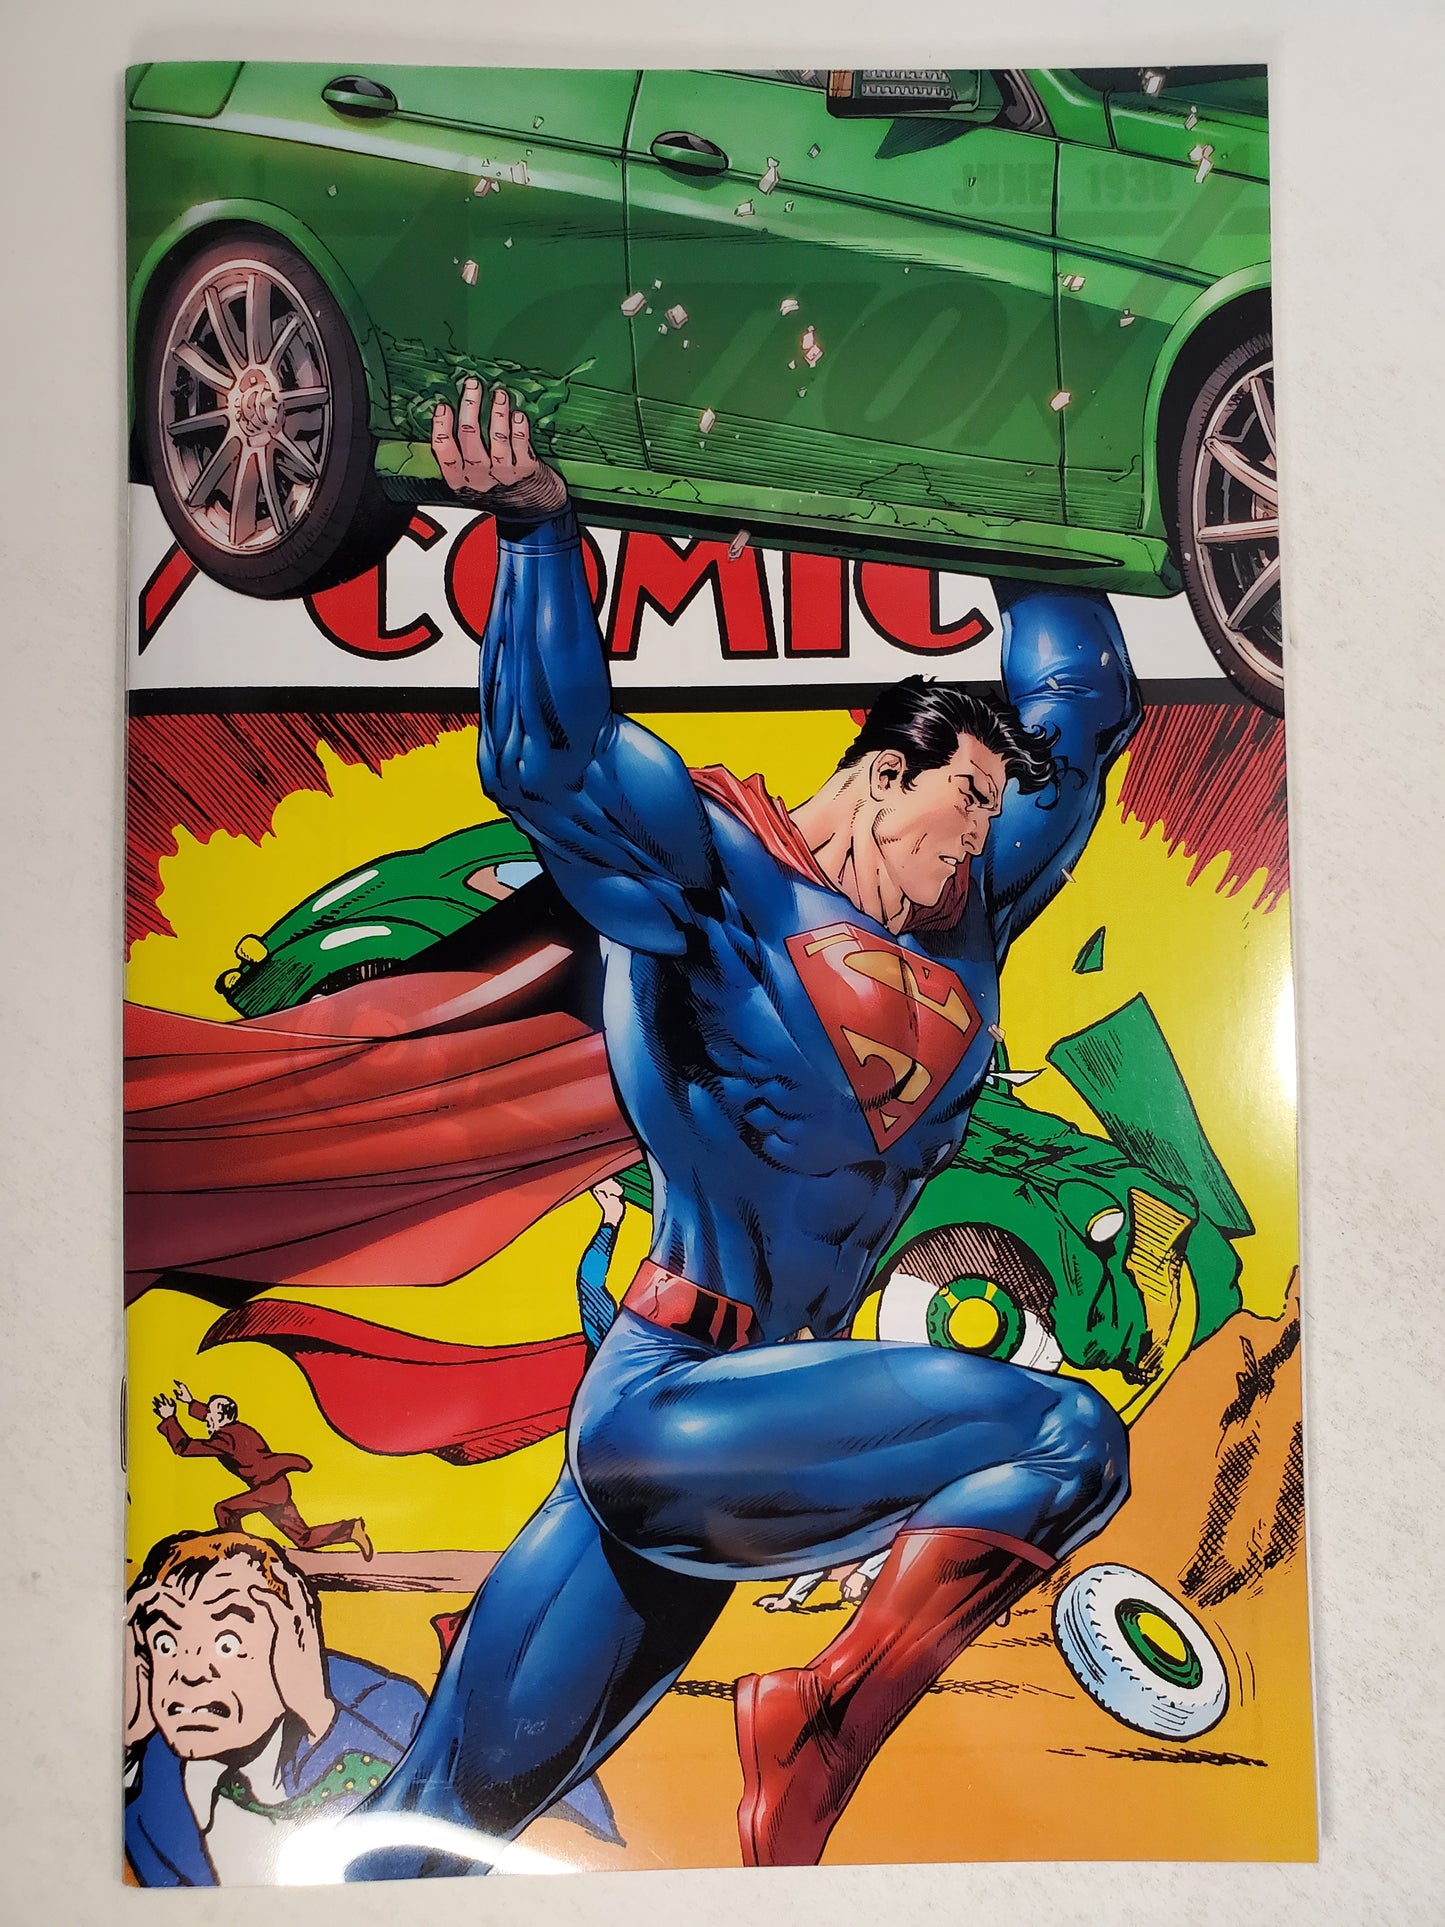 DC Action Comics #1 Special Convention Excl Acetate Overlay